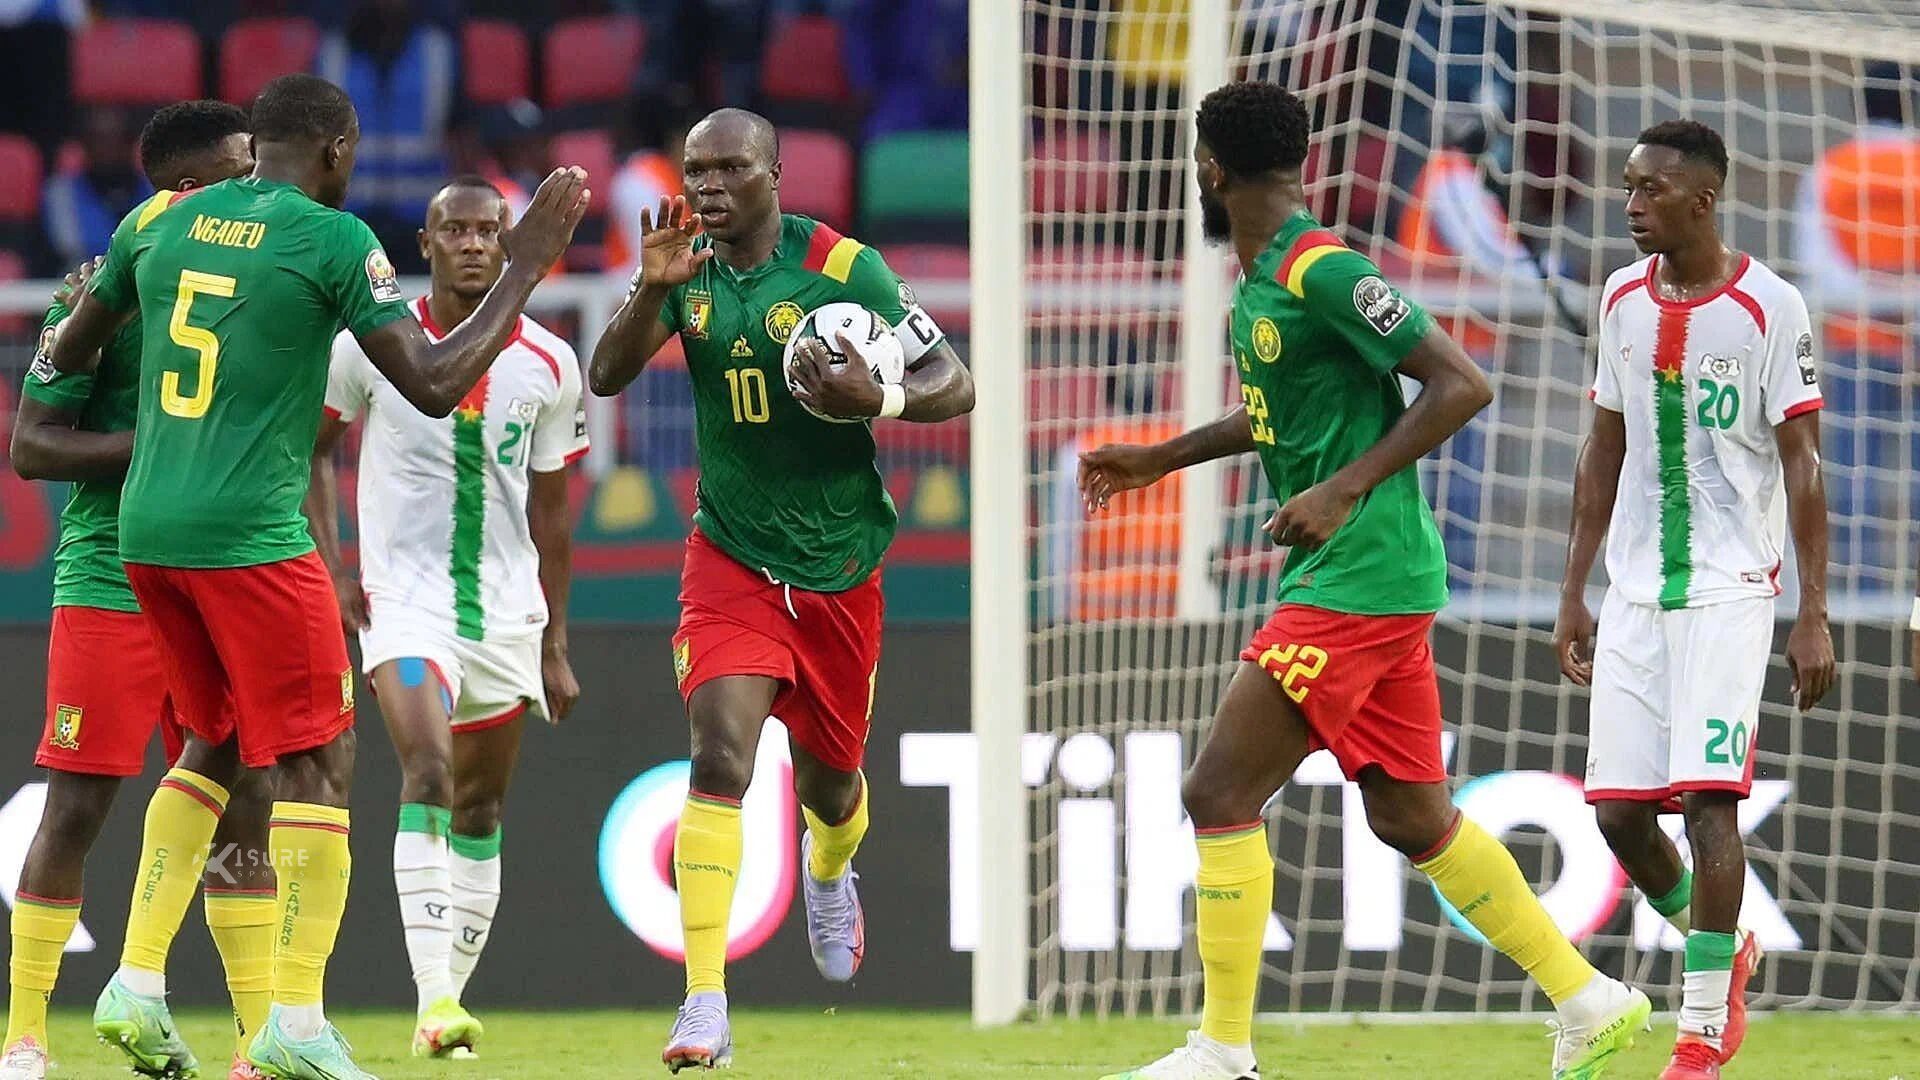 Cameroon came from 3-0 down to level at 3-3 against Burkina Faso | Africa Cup Of Nations